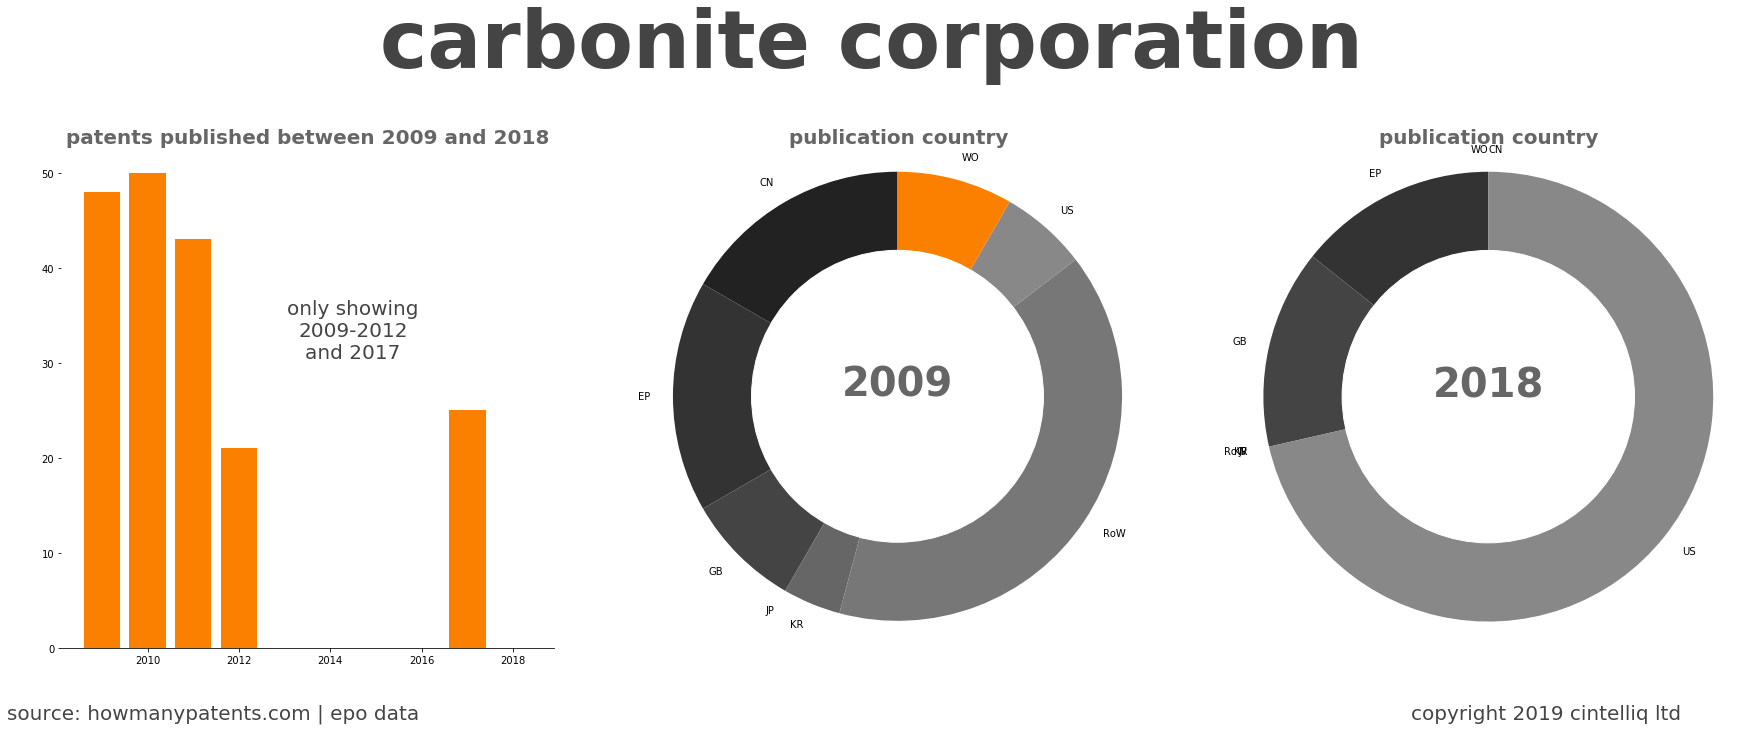 summary of patents for Carbonite Corporation